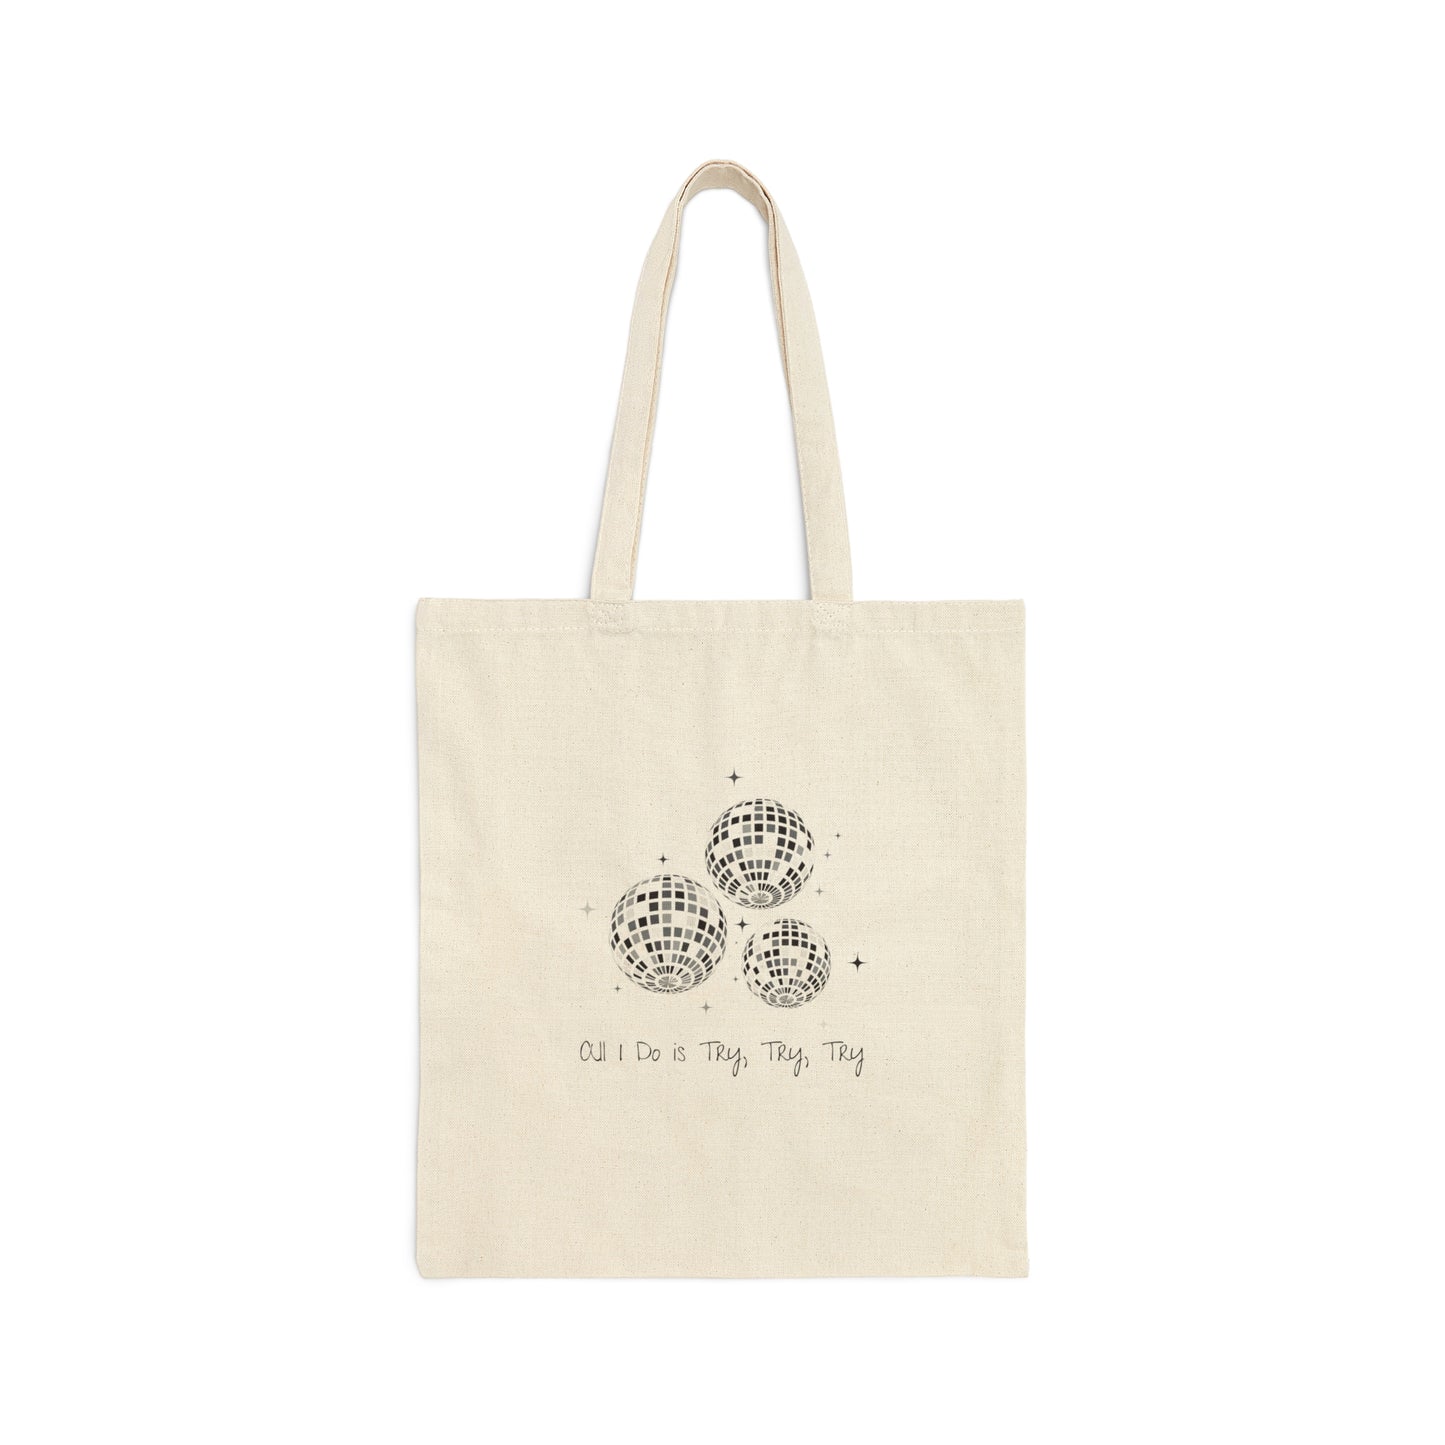 All I Do Is Try Try Try Tote Bag